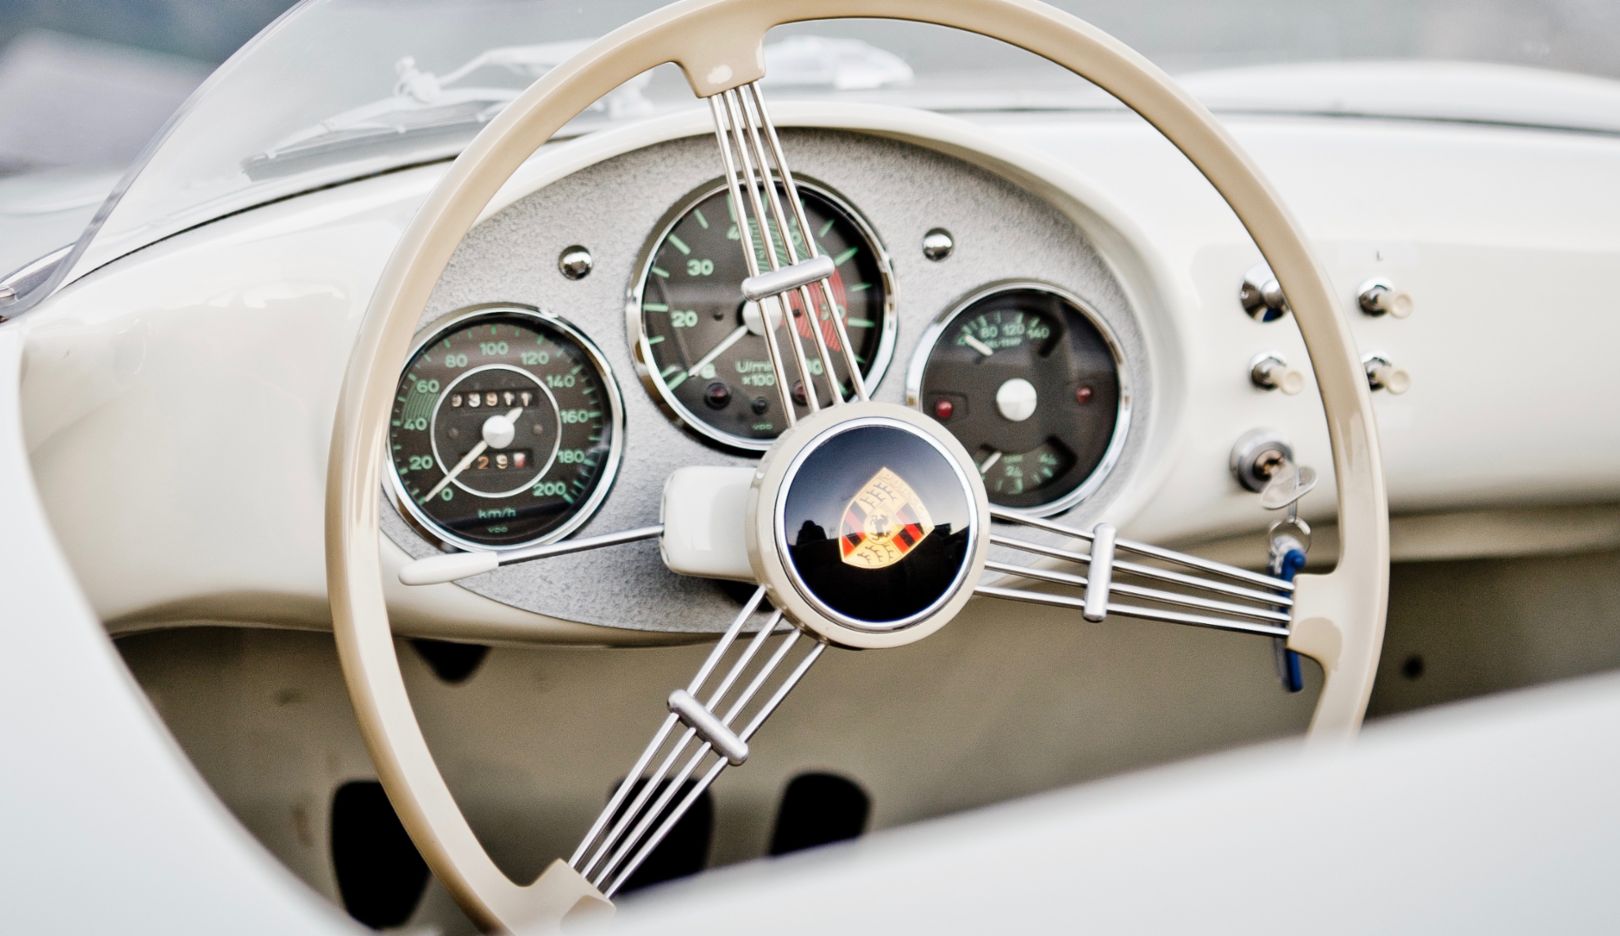 The narrow ivory-colored rim of the steering wheel and the triple spring spokes offer a clear view of the three instruments, with the rev counter at the center. Typical Porsche.